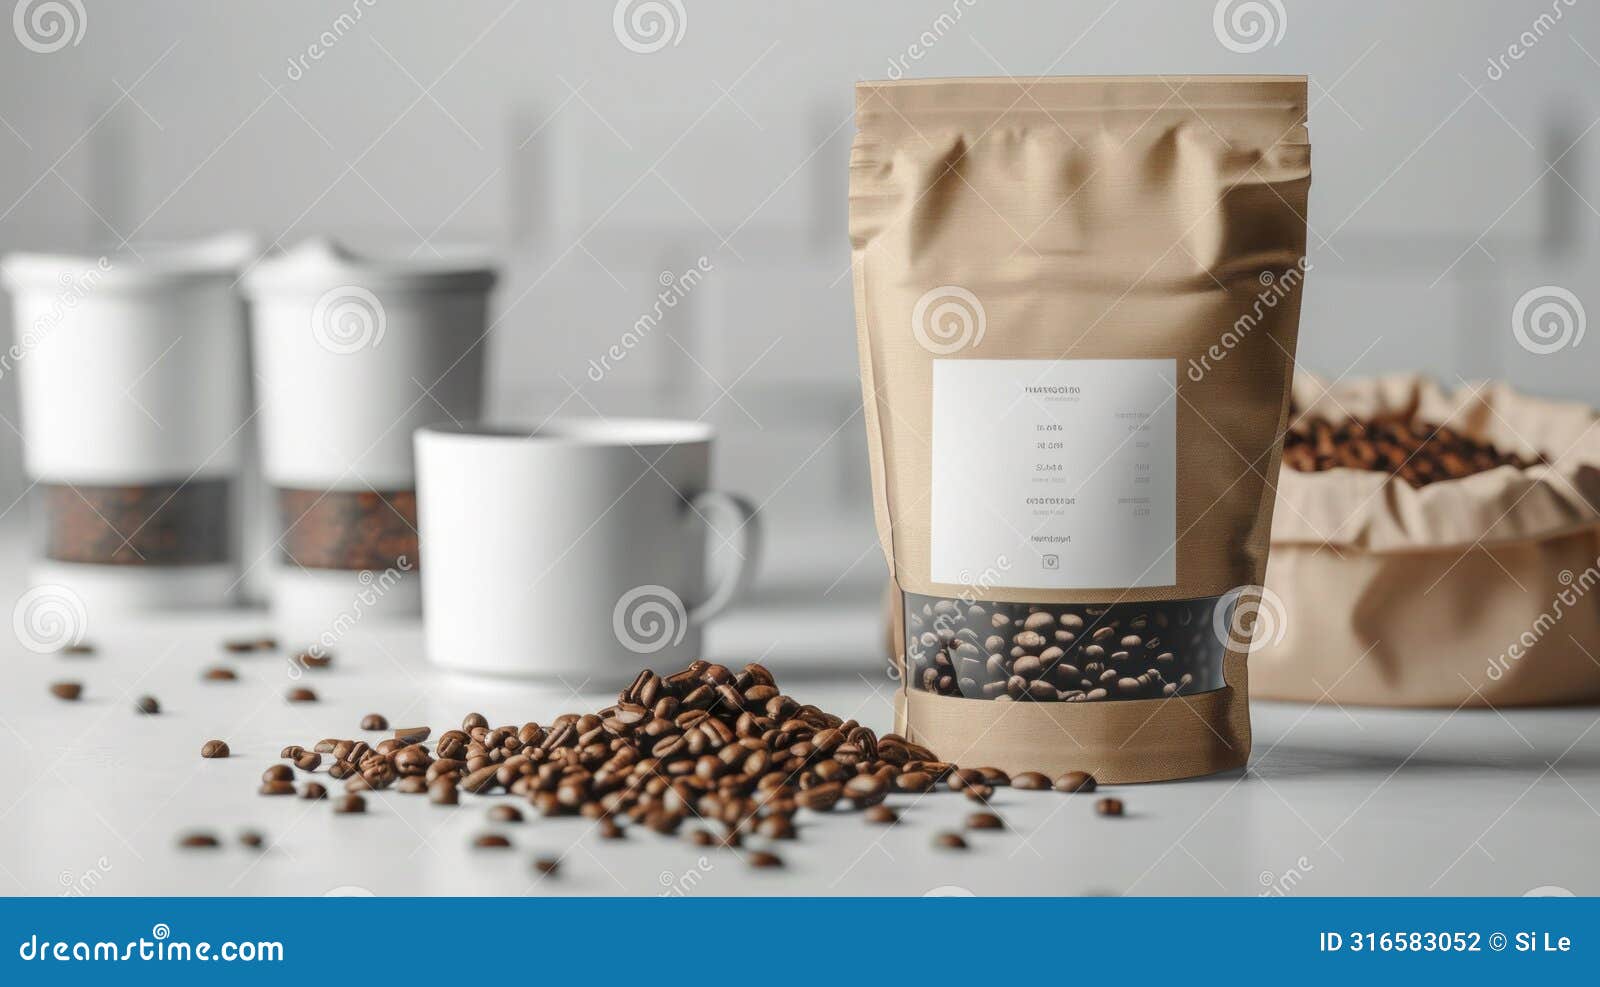 minimalist white artisanal and ecological coffee brand mockup with windowed packaging and white label tag on white bag